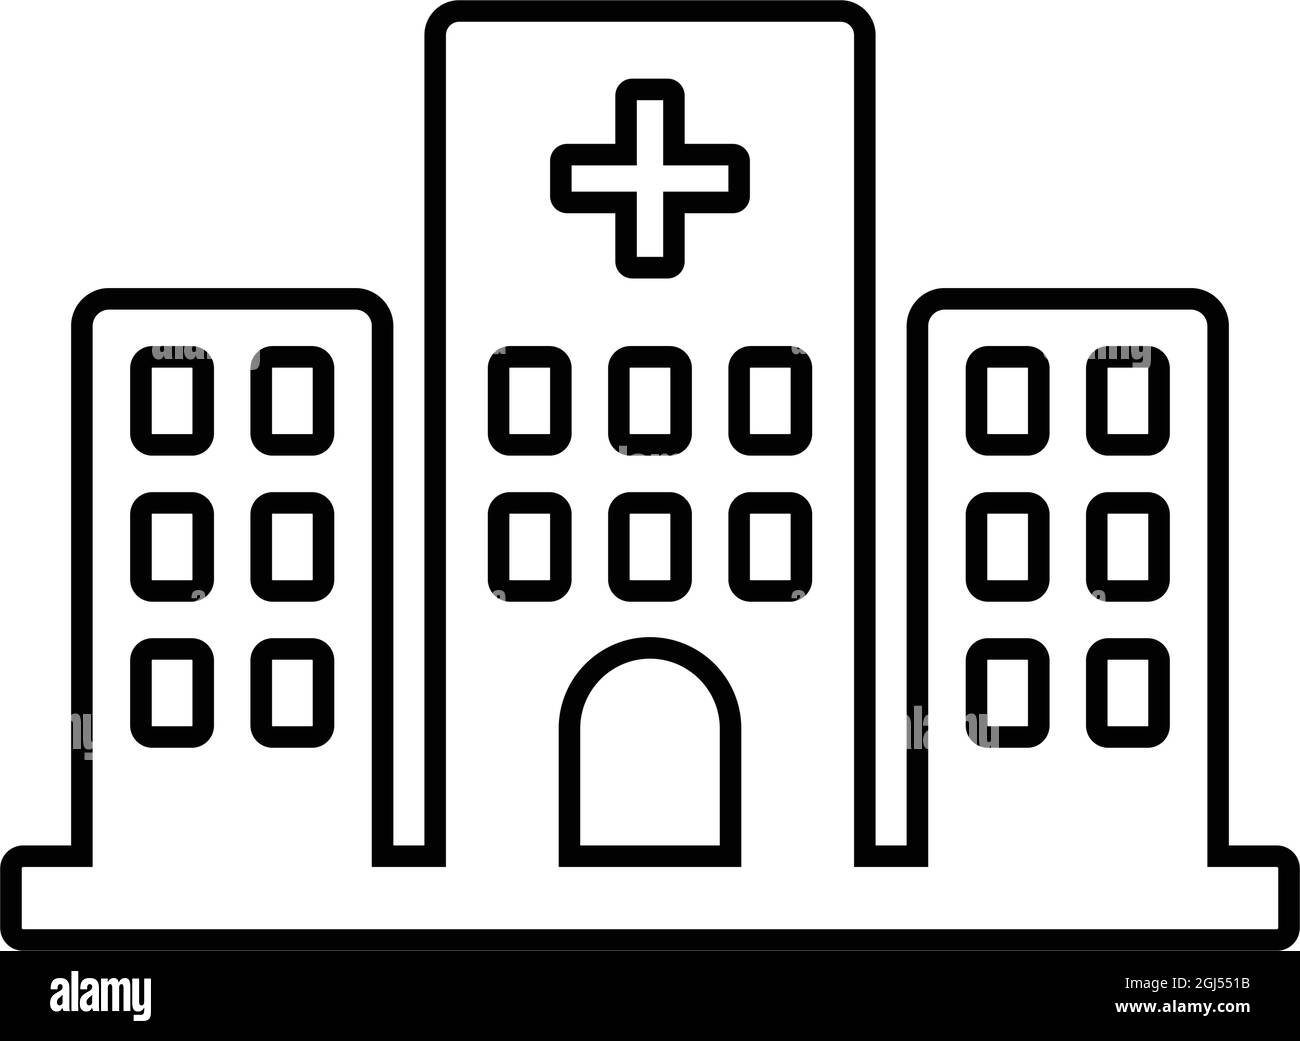 Building, hospital icon - Use for commercial purposes, print media, web or any type of design projects. Vector EPS file. Stock Vector